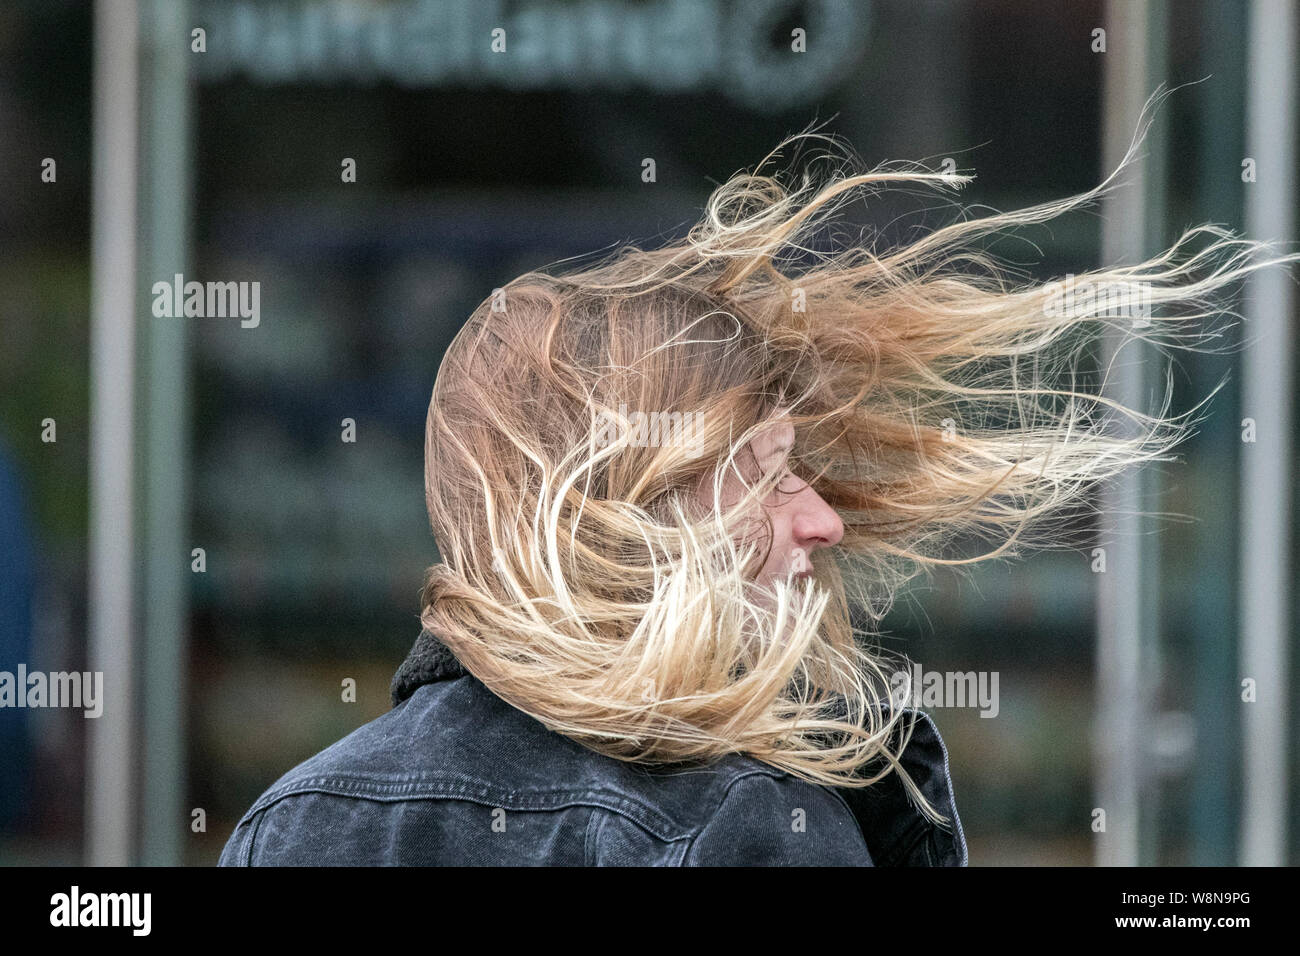 Windswept hair wind blown bad hair day windy weather storm stormy day  landscape windswept, hair, woman, female, wind, portrait, long hair, face,  outdoors, adult, style, day, person, hairstyle, women, fashionable, windy,  head